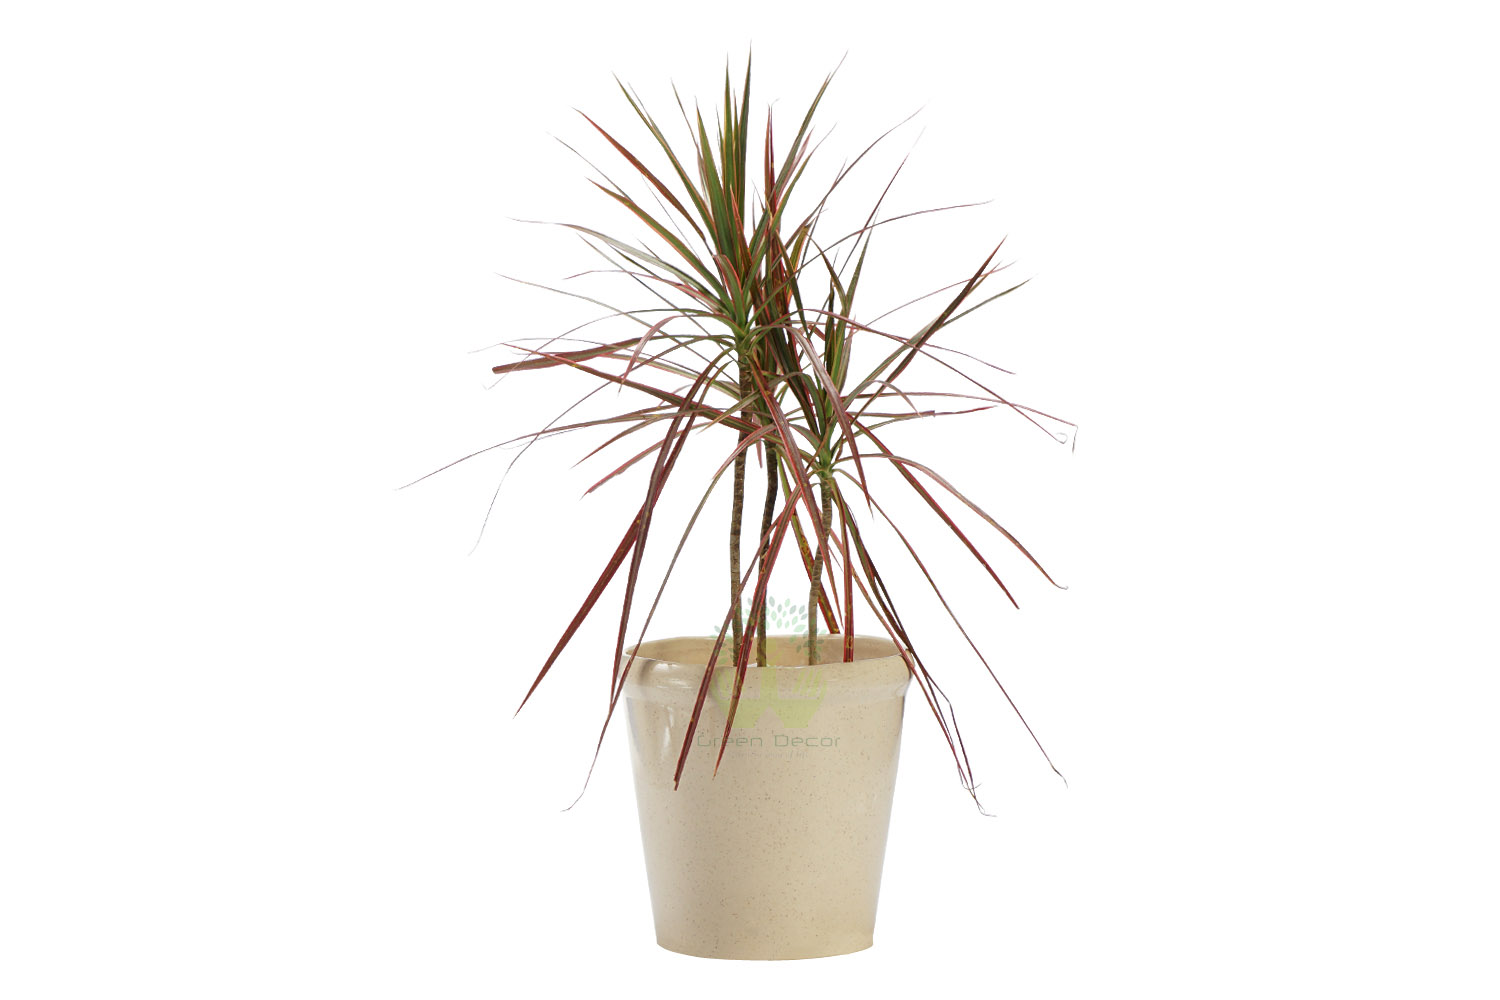 Buy Dracaena Marginata Tricolor Plant Front View, White Pots and Seeds in Delhi NCR by the best online nursery shop Greendecor.